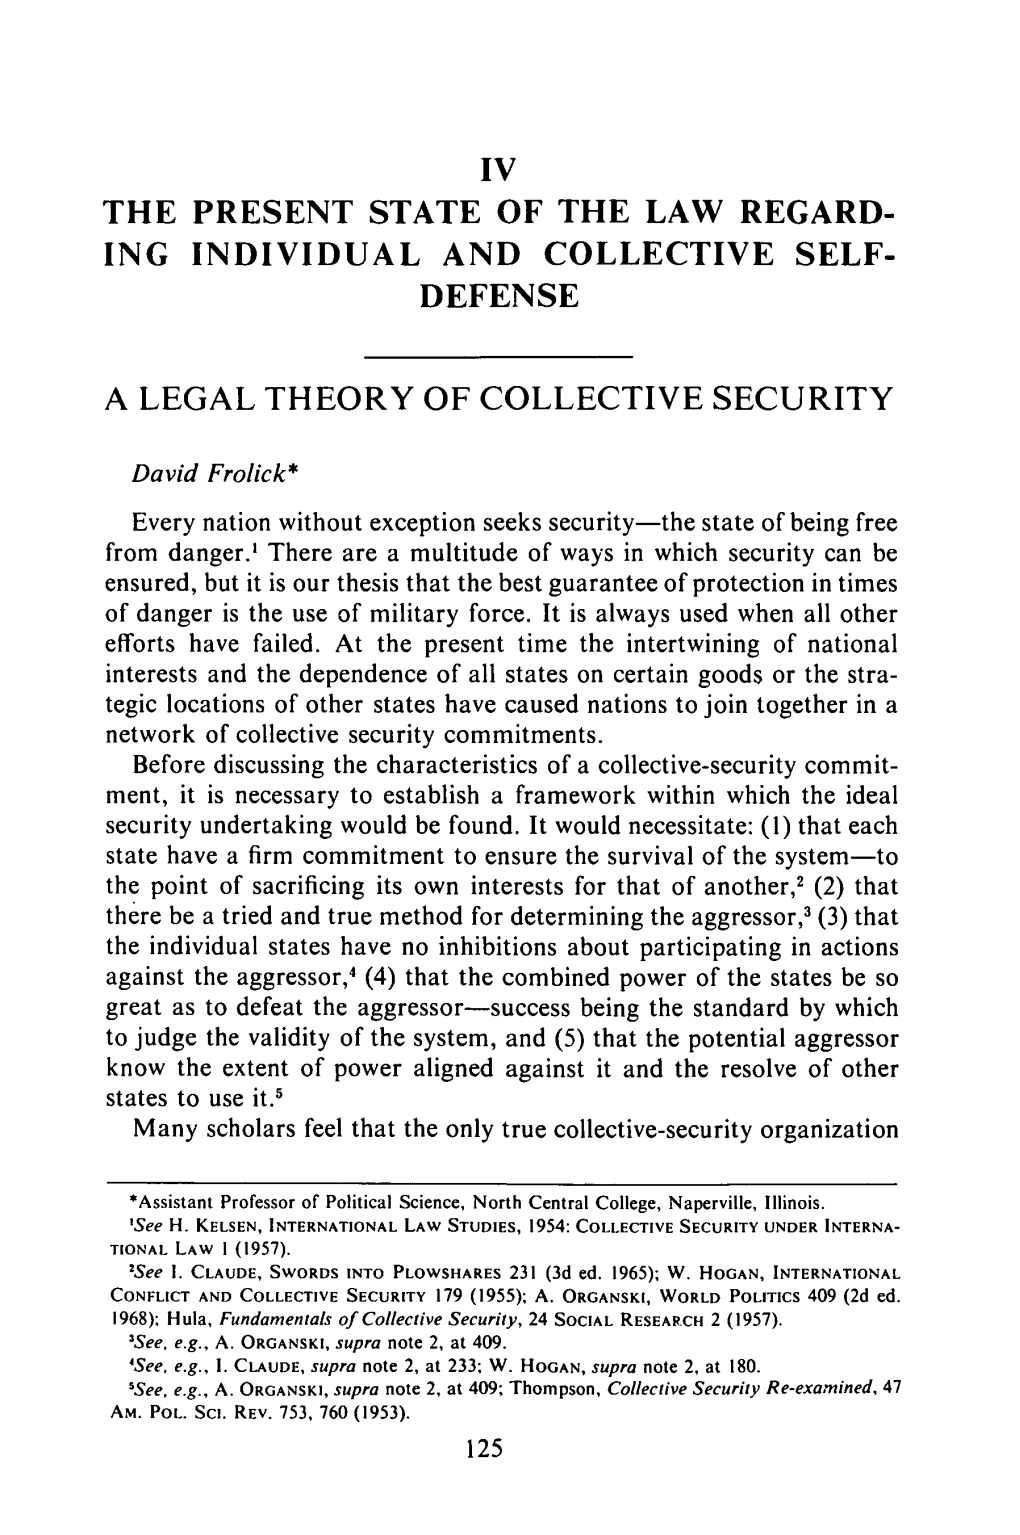 Legal Theory of Collective Security, A